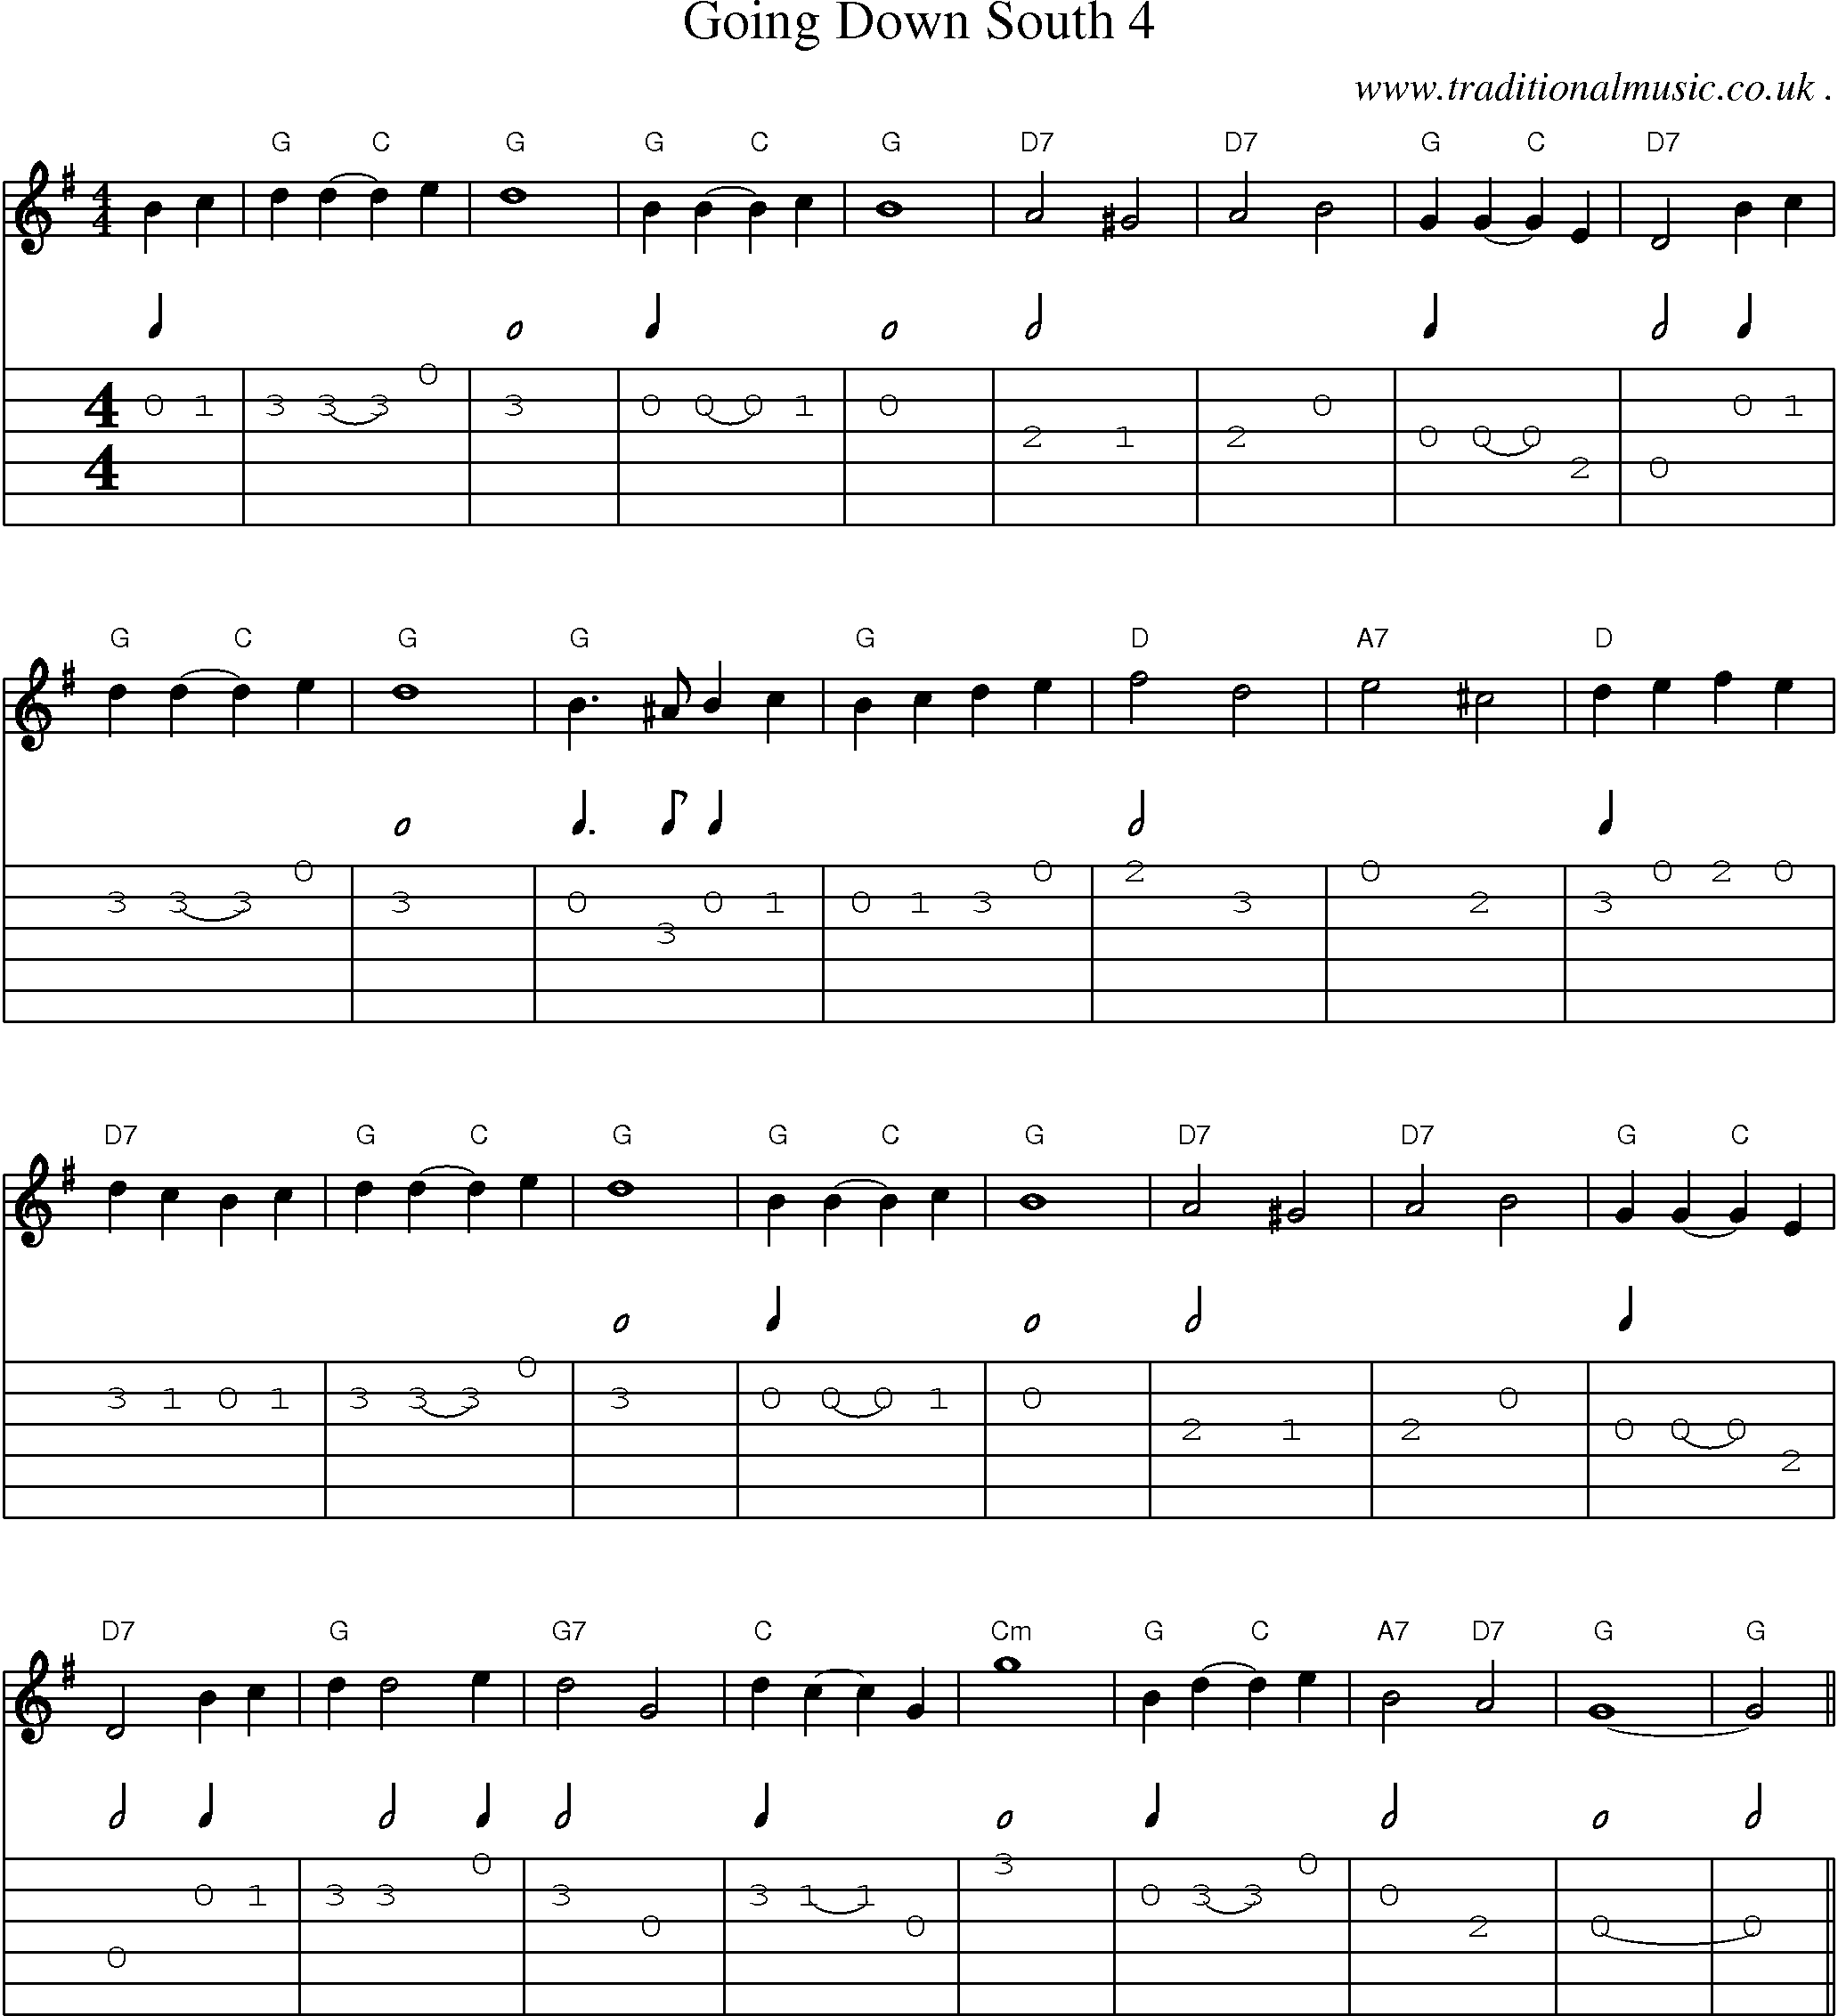 Music Score and Guitar Tabs for Going Down South 4